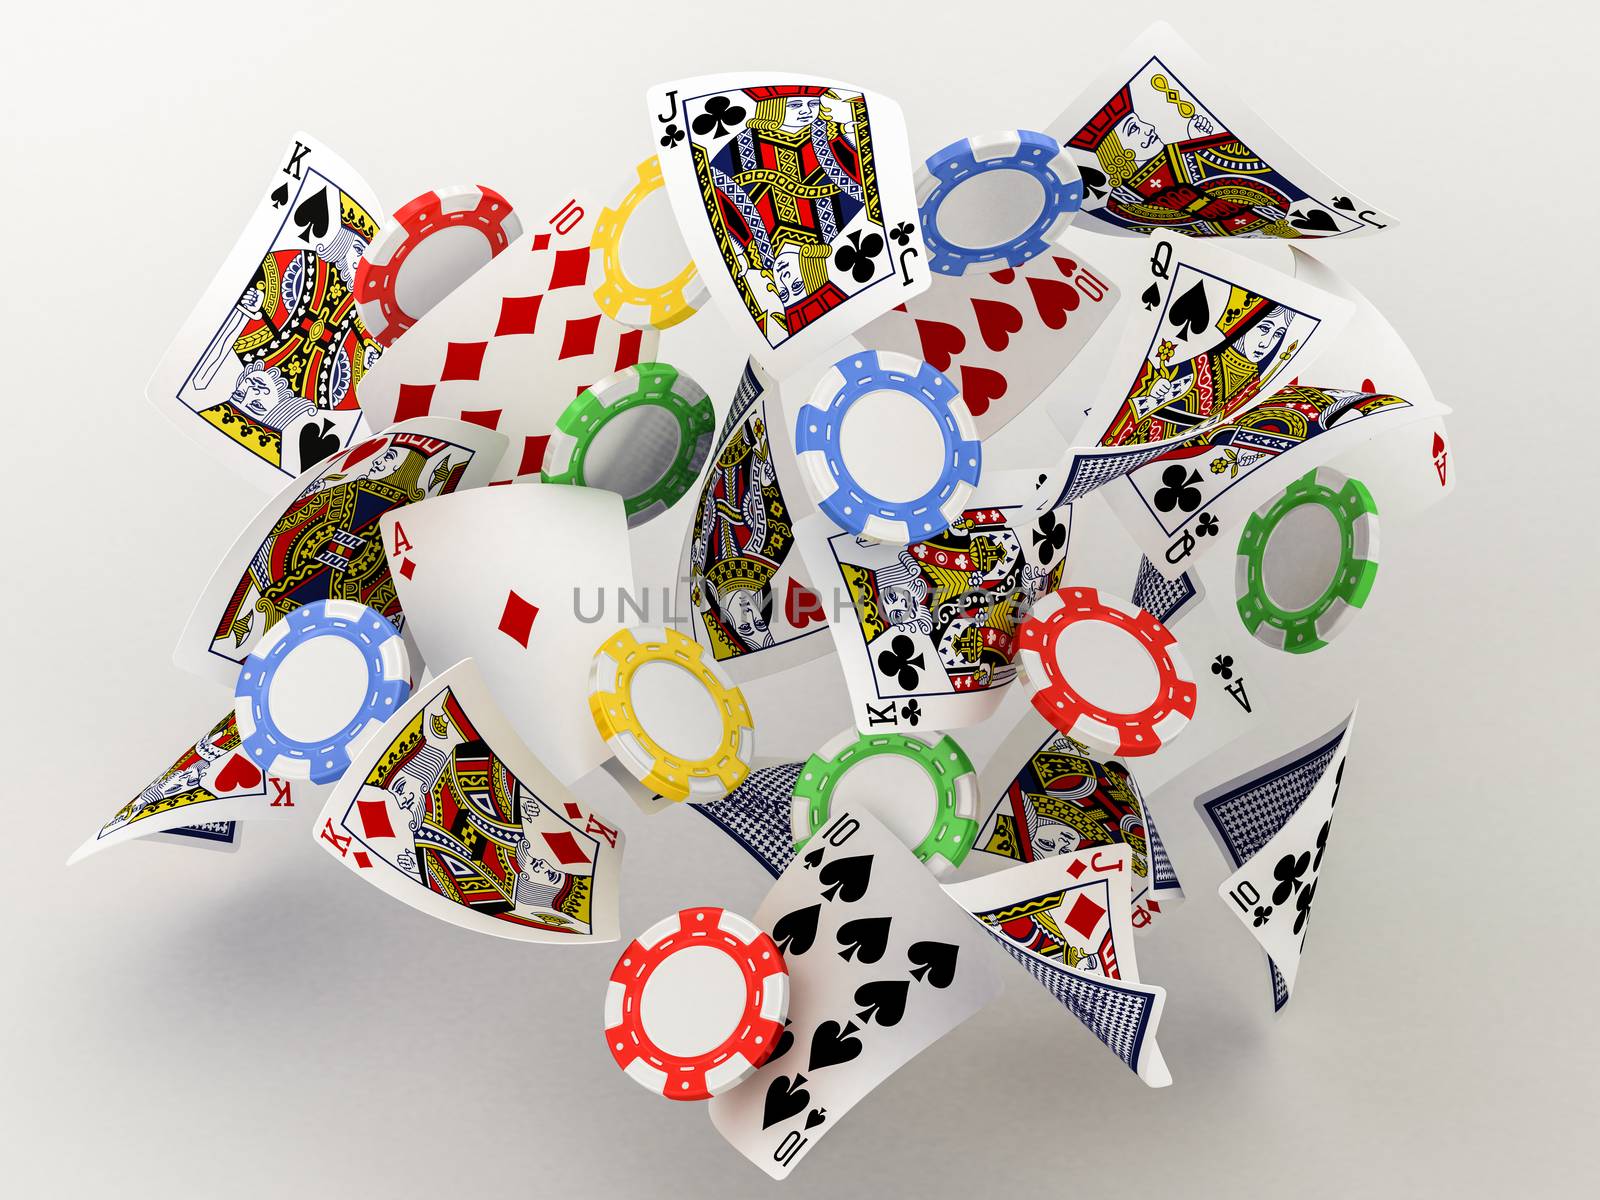 dice, chips and cards on a white background